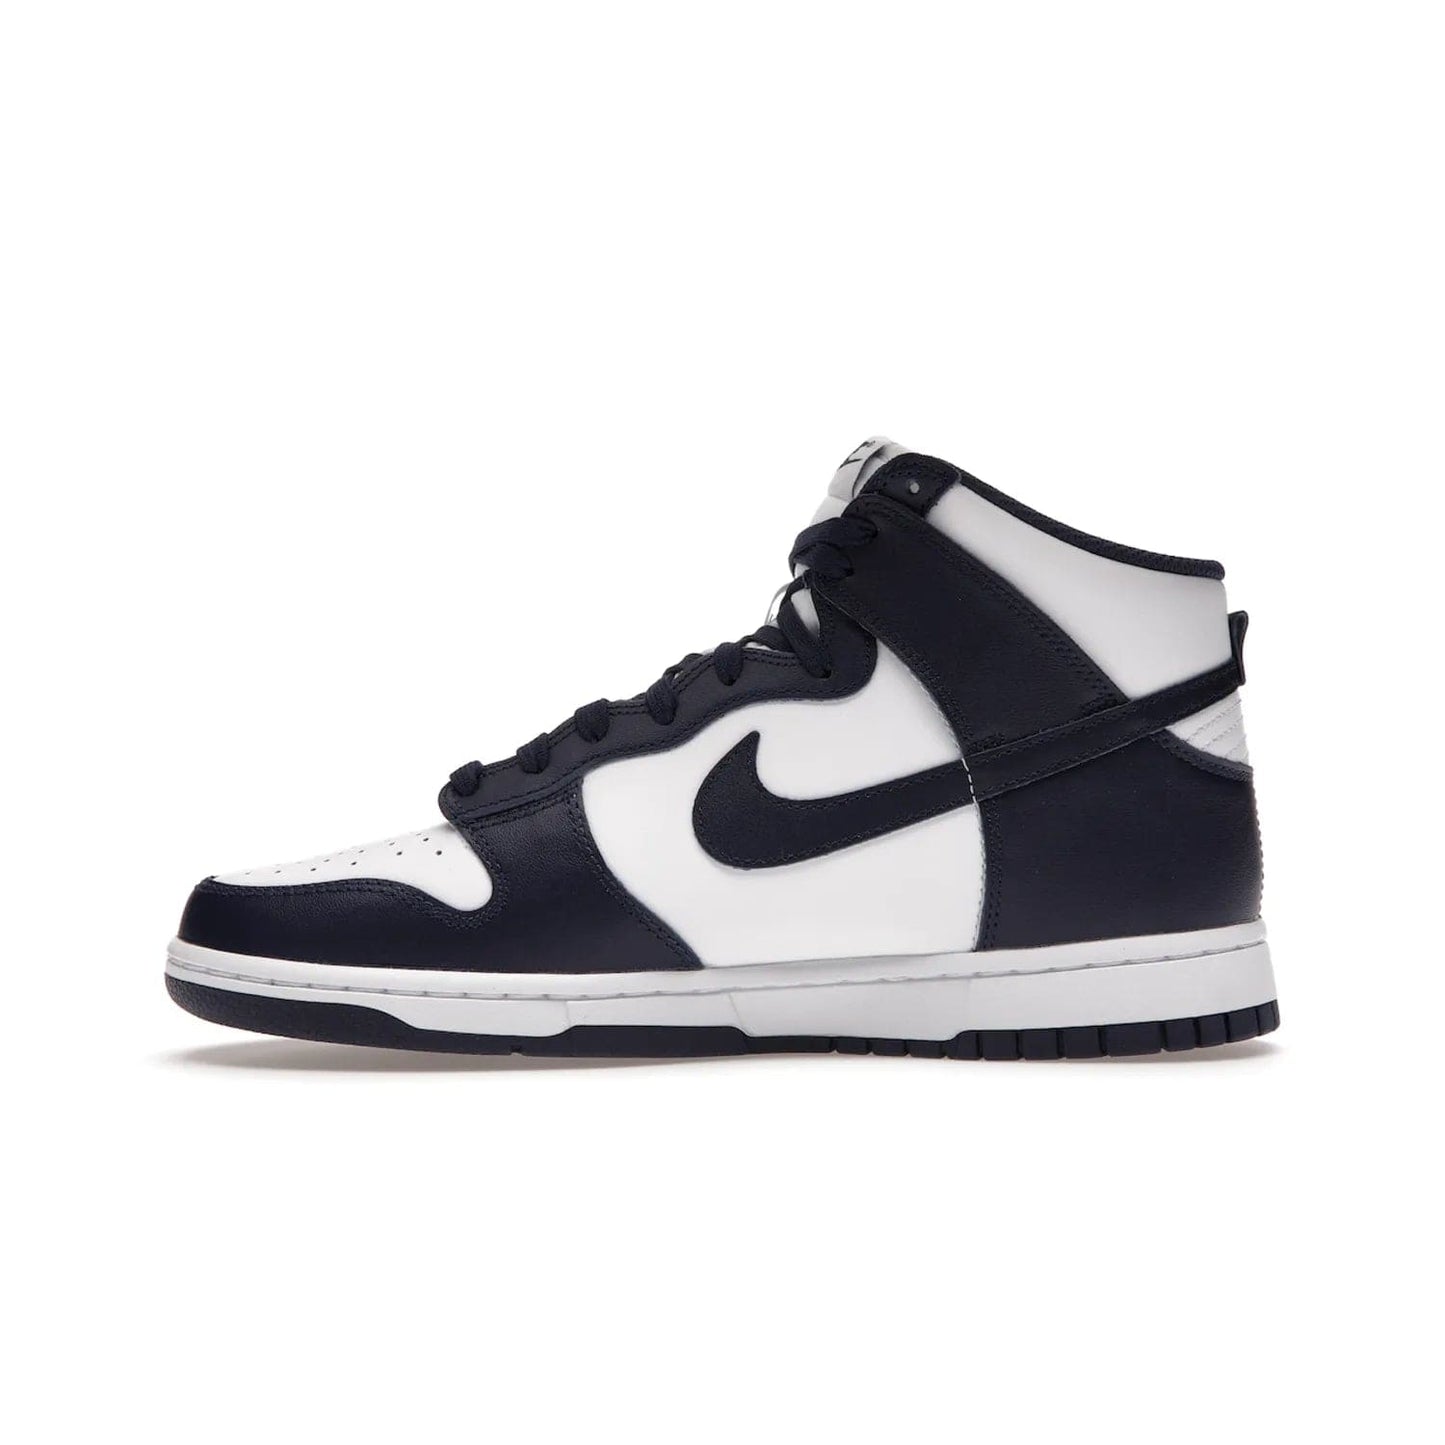 Nike Dunk High Championship Navy - Image 19 - Only at www.BallersClubKickz.com - Classic athletic style meets striking color-blocking on the Nike Dunk High Championship Navy. A white leather upper with Championship Navy overlays creates a retro look with a woven tongue label and sole. Unleash your inner champion with the Nike Dunk High Championship Navy.